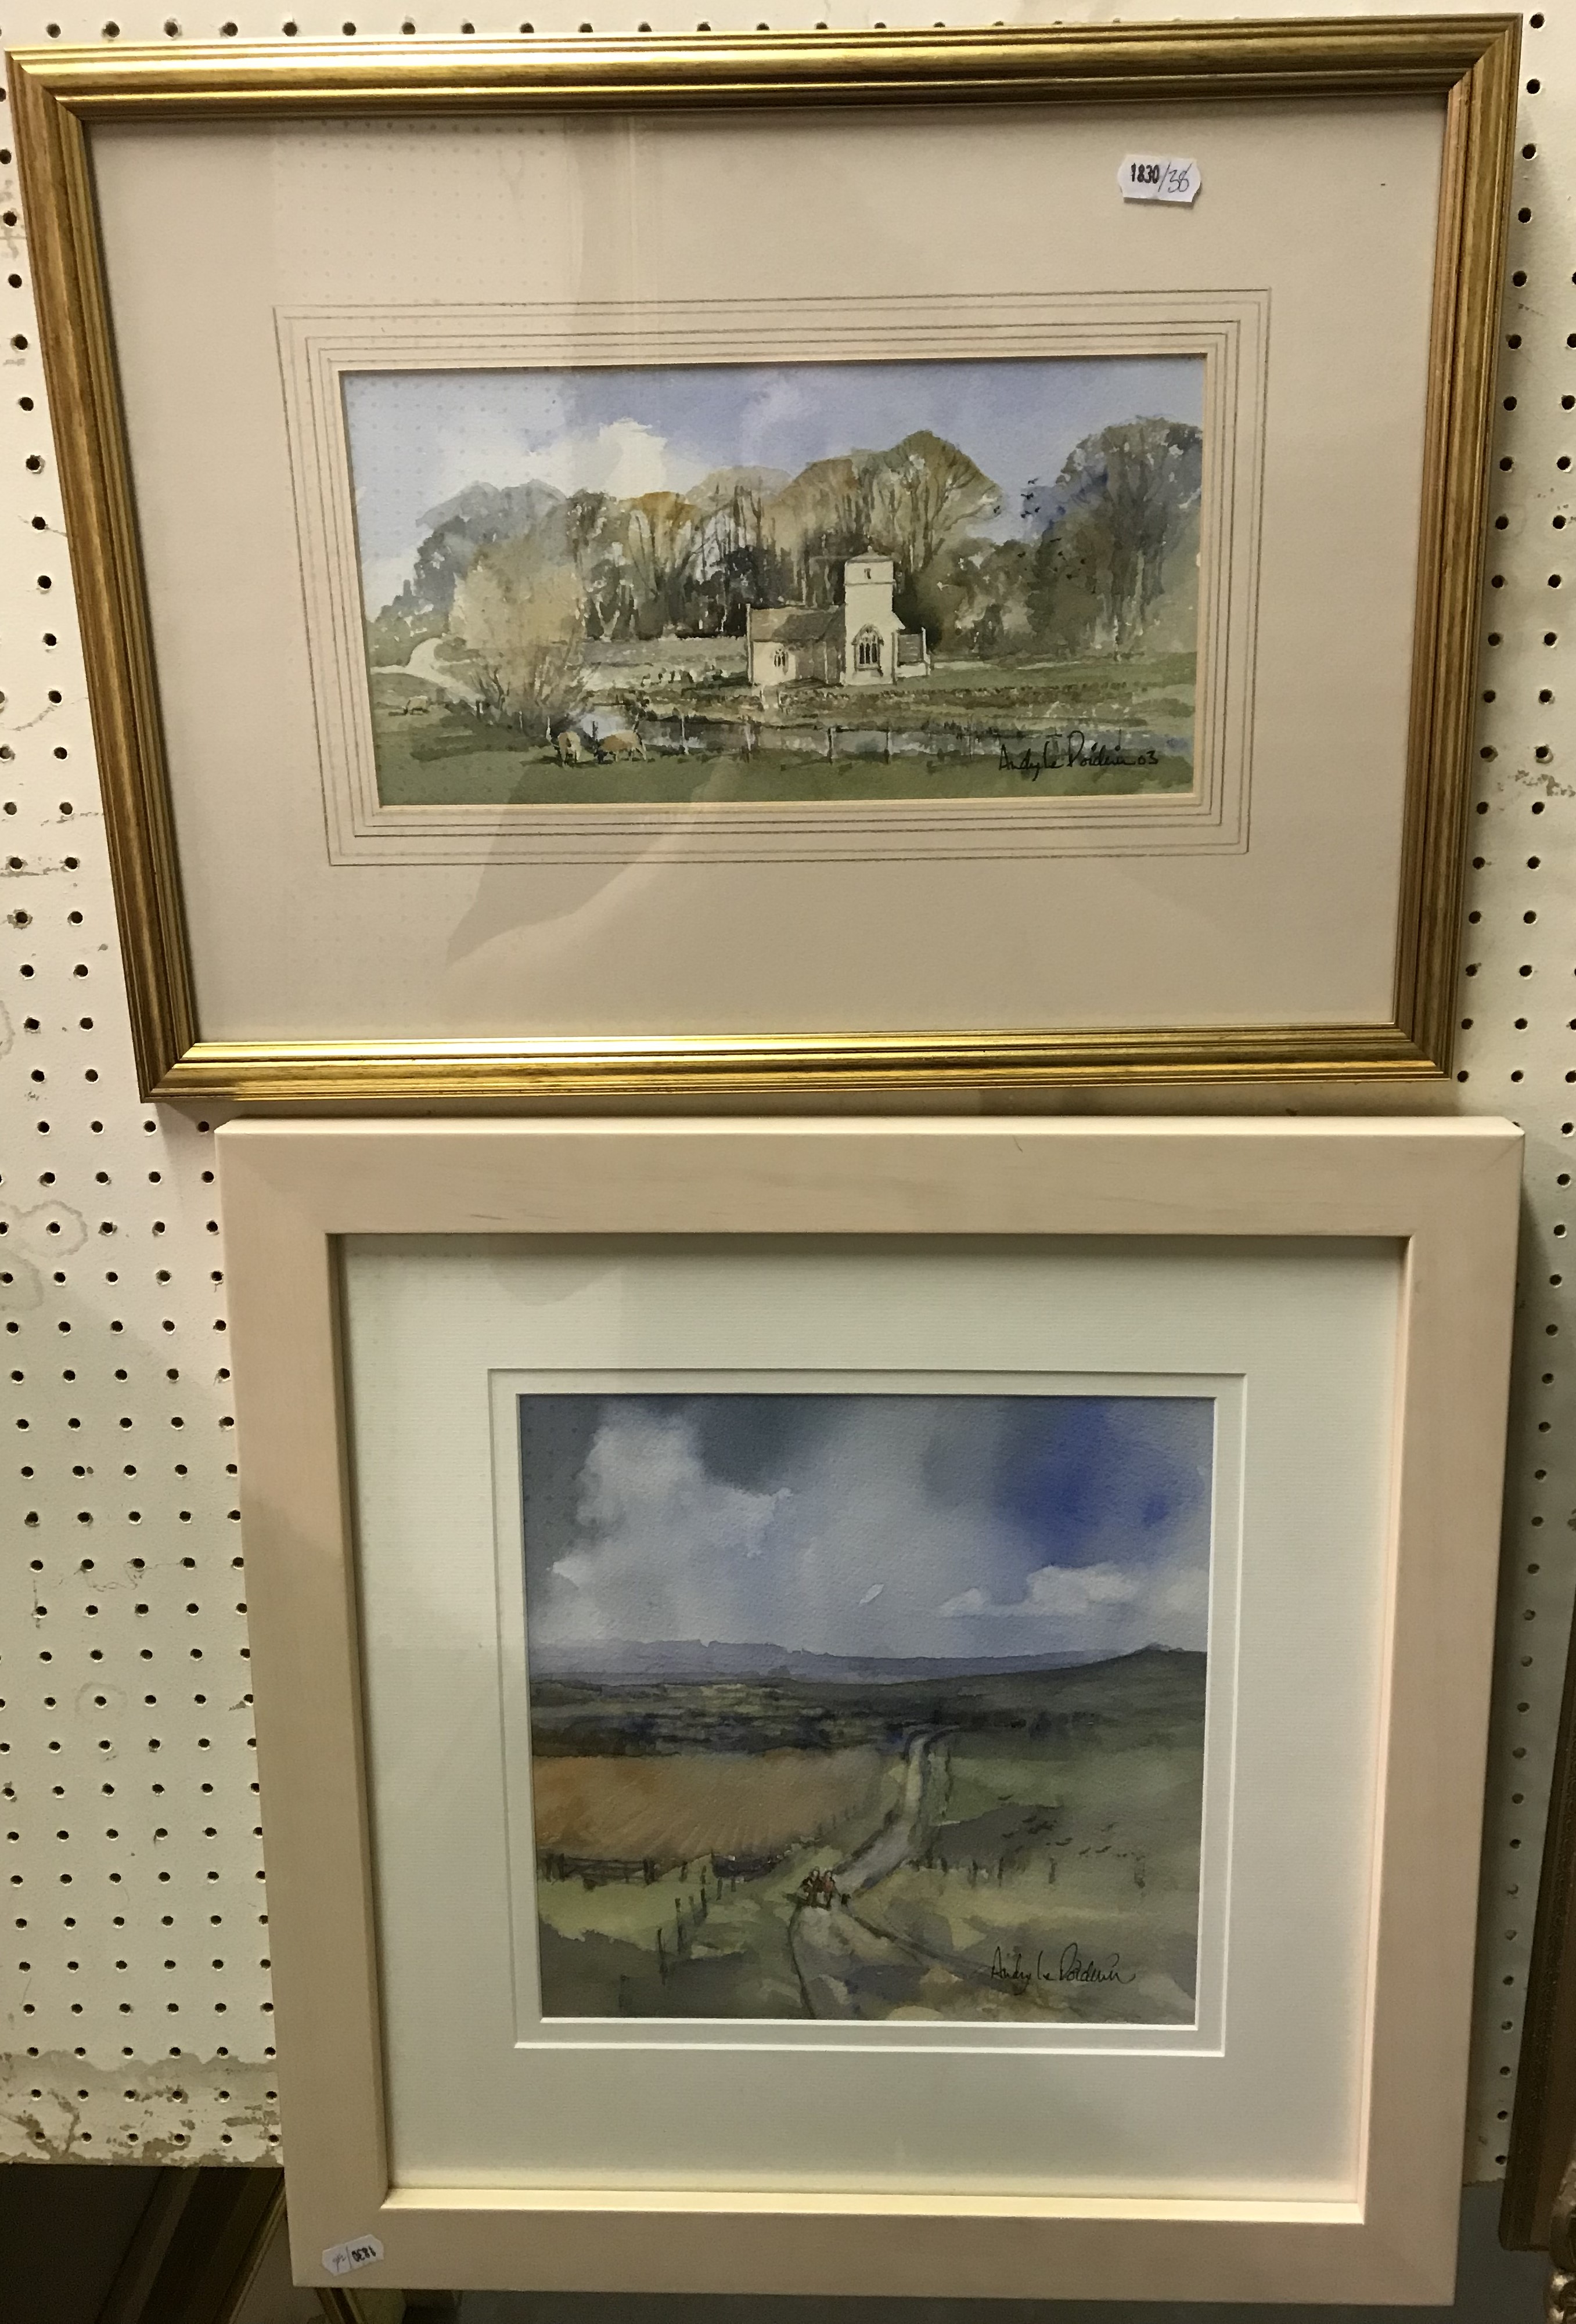 ANDY LE POIDEVIN "Walking the Ridgeway", watercolour, signed lower right,